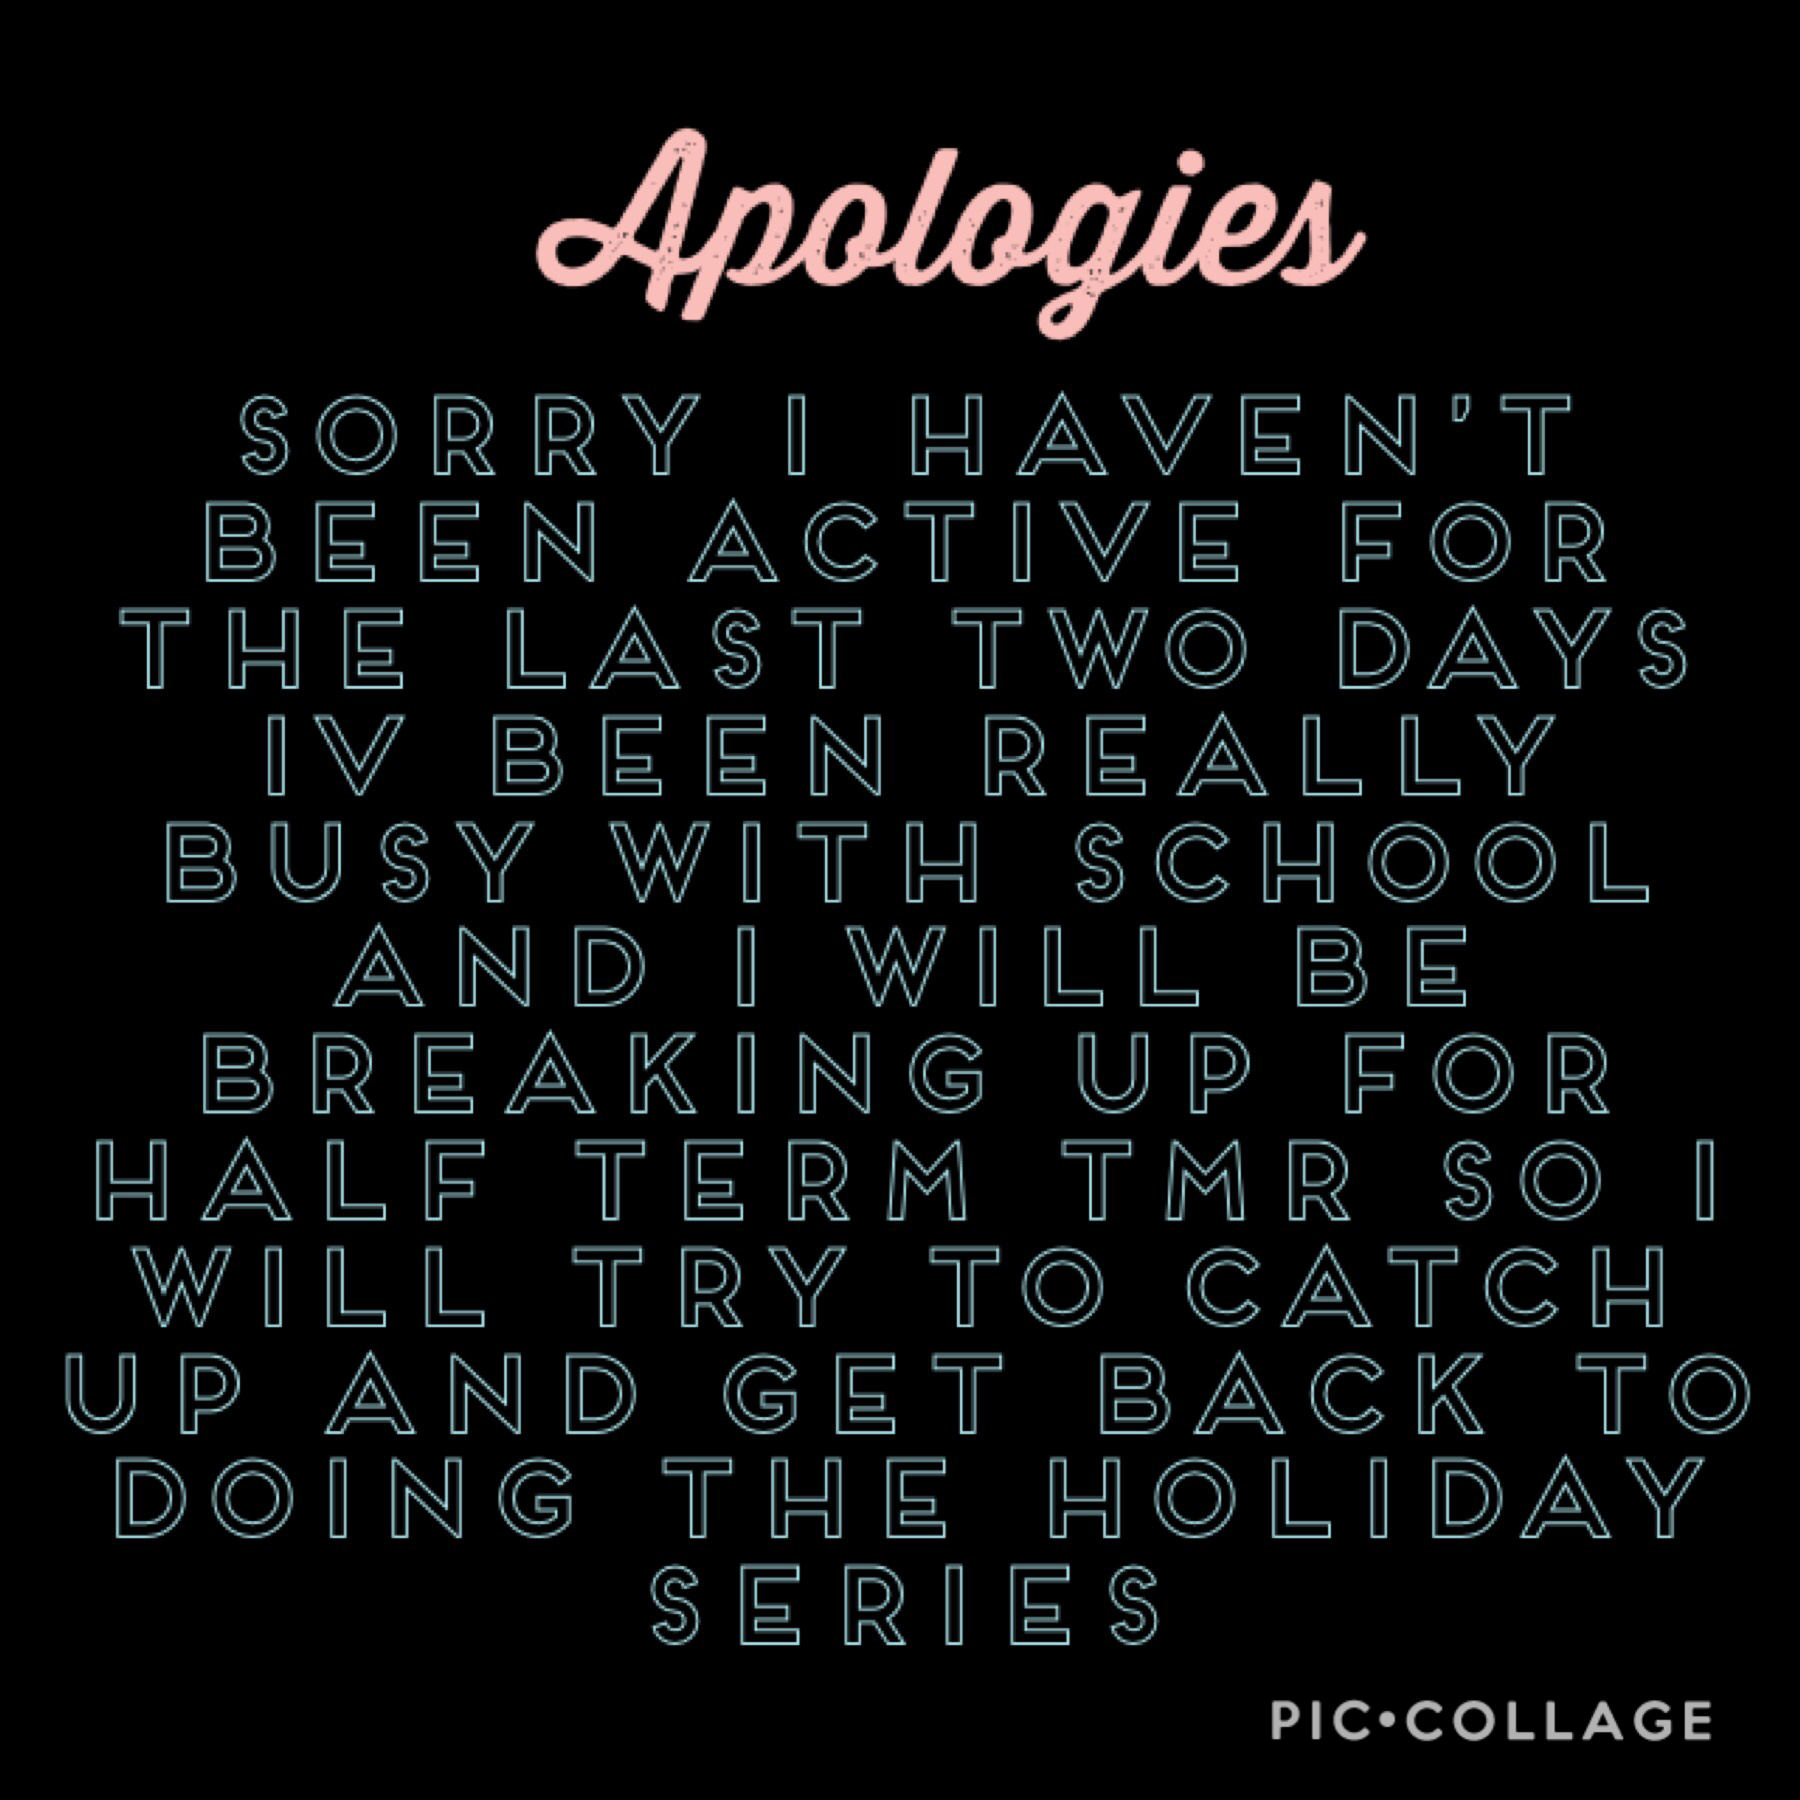 Just wanted to apologise for being inactive for a couple of days I have been really busy with school and I will be going back to normal on Thursday ❤️